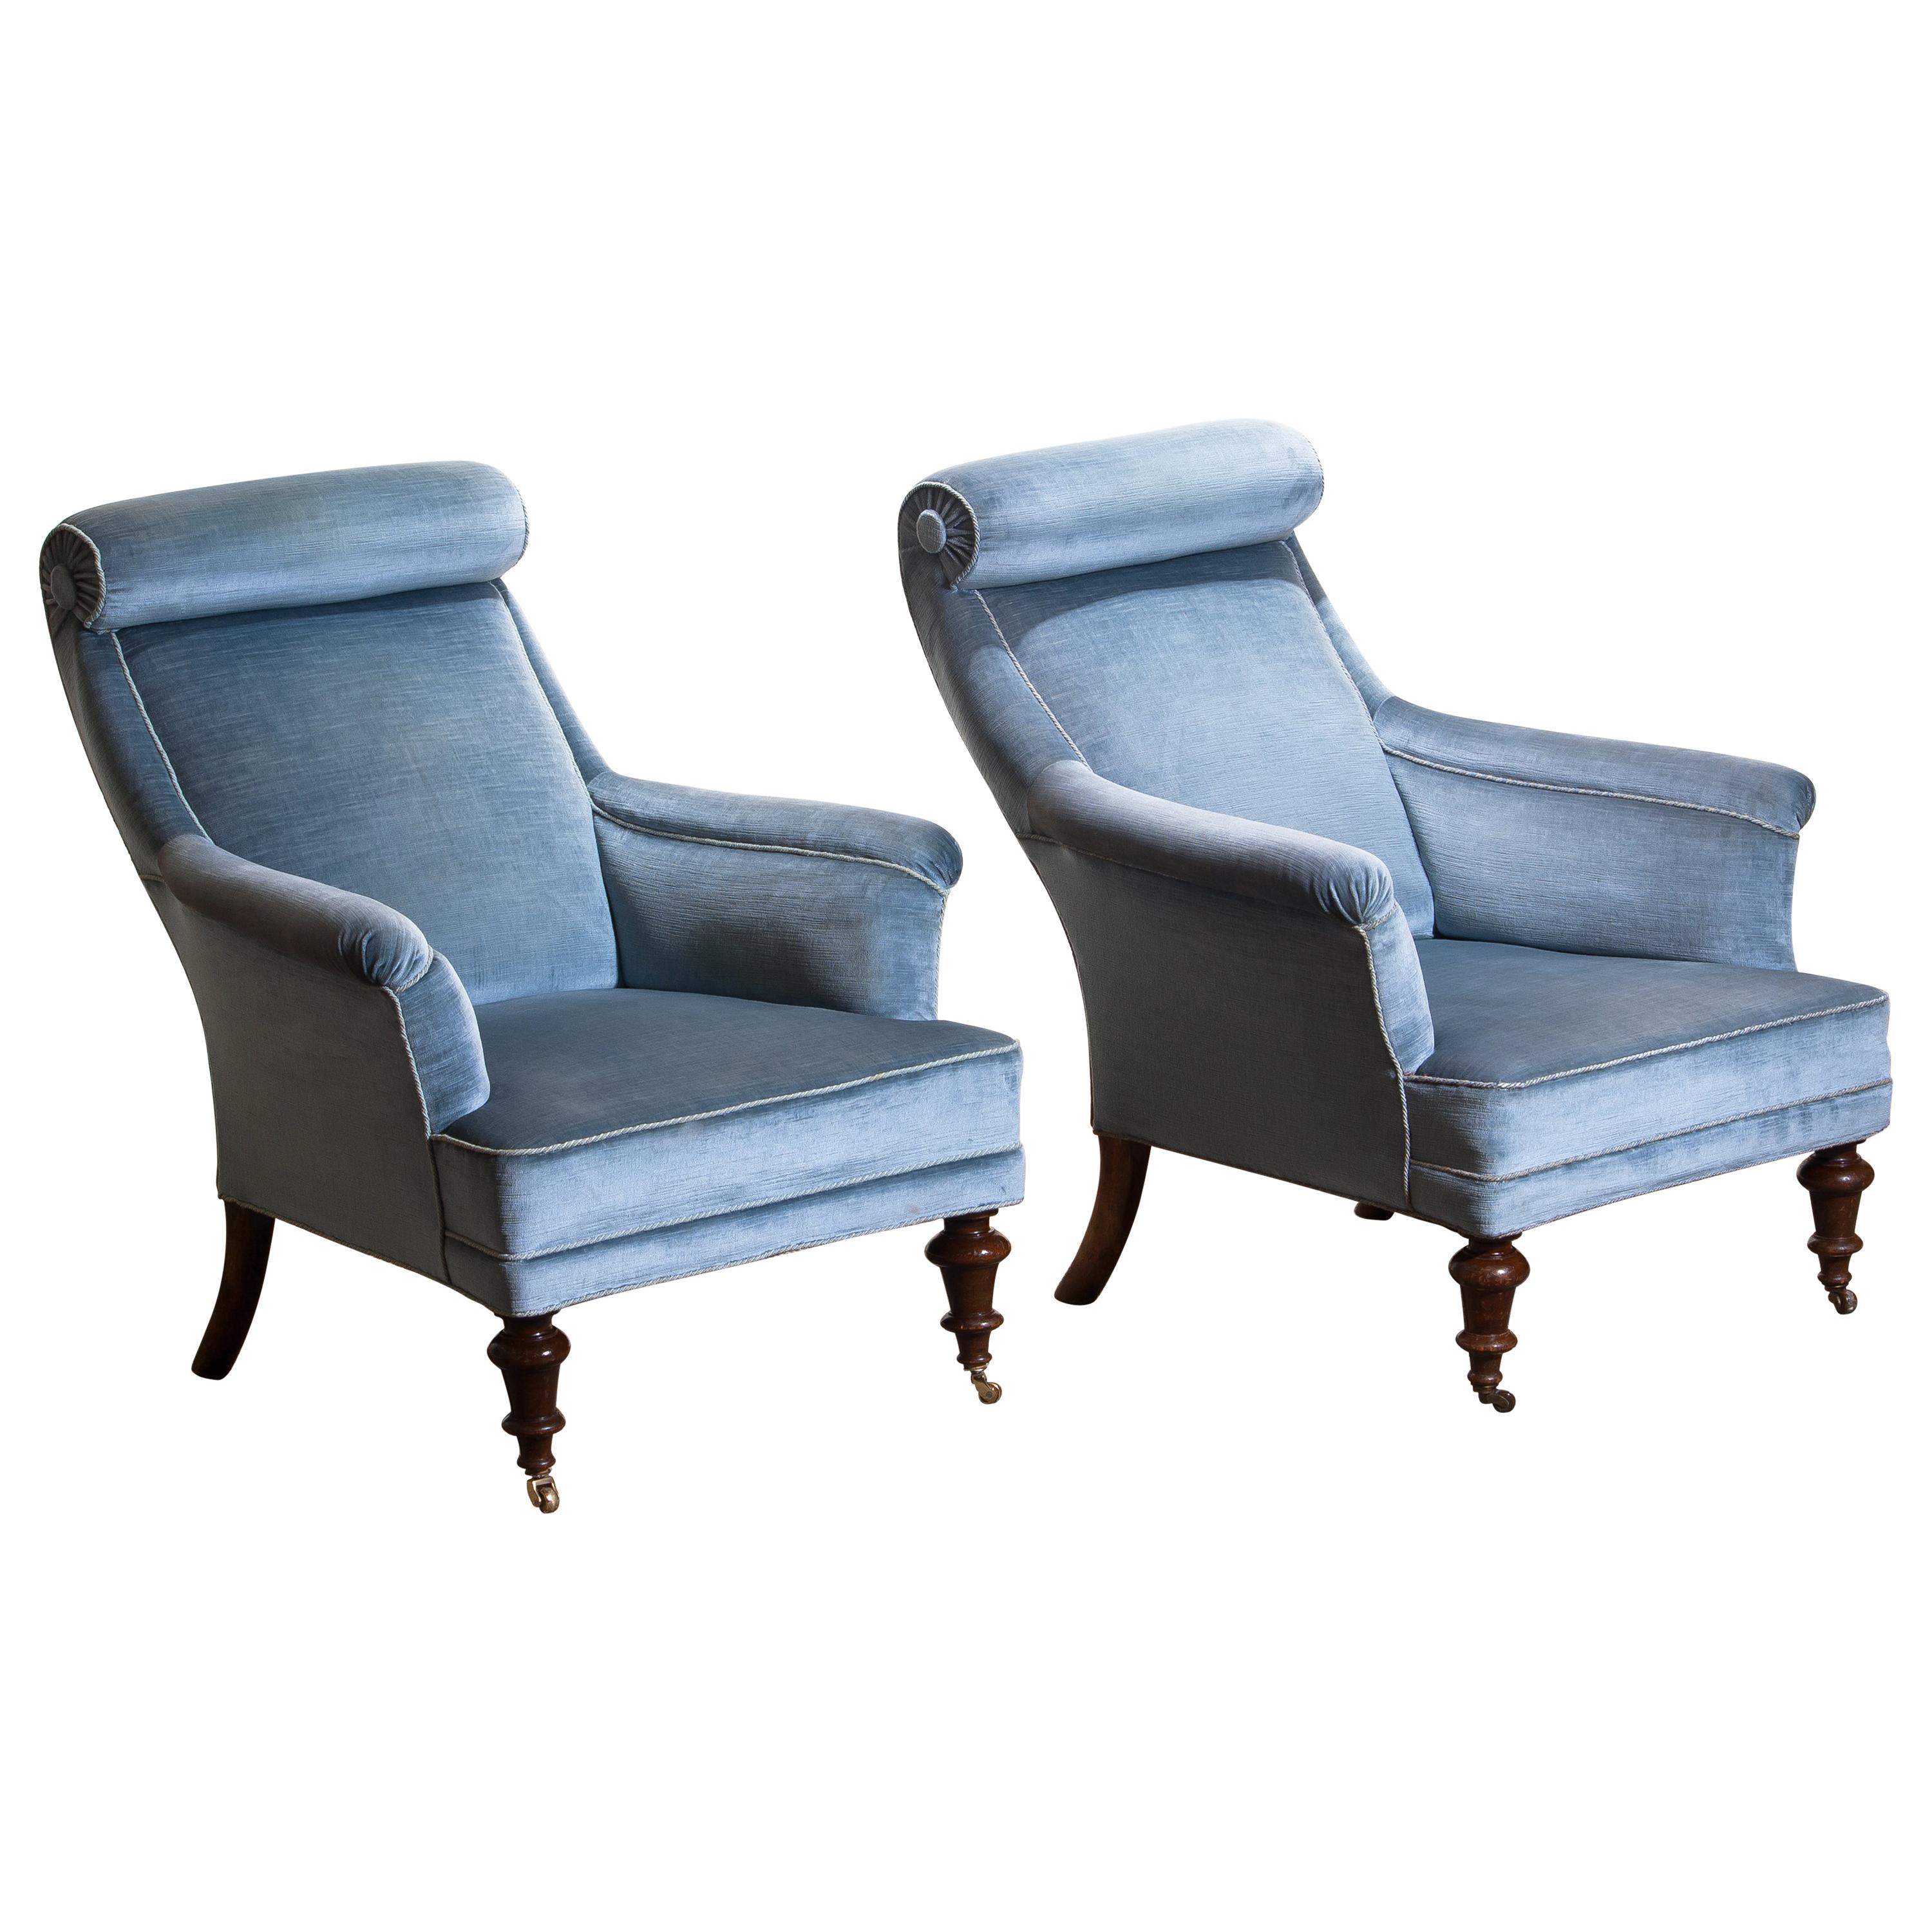 1900s Set of Two Ice Blue Velvet Dorothy Draper Style Bergère / Lounge Chairs In Good Condition In Silvolde, Gelderland